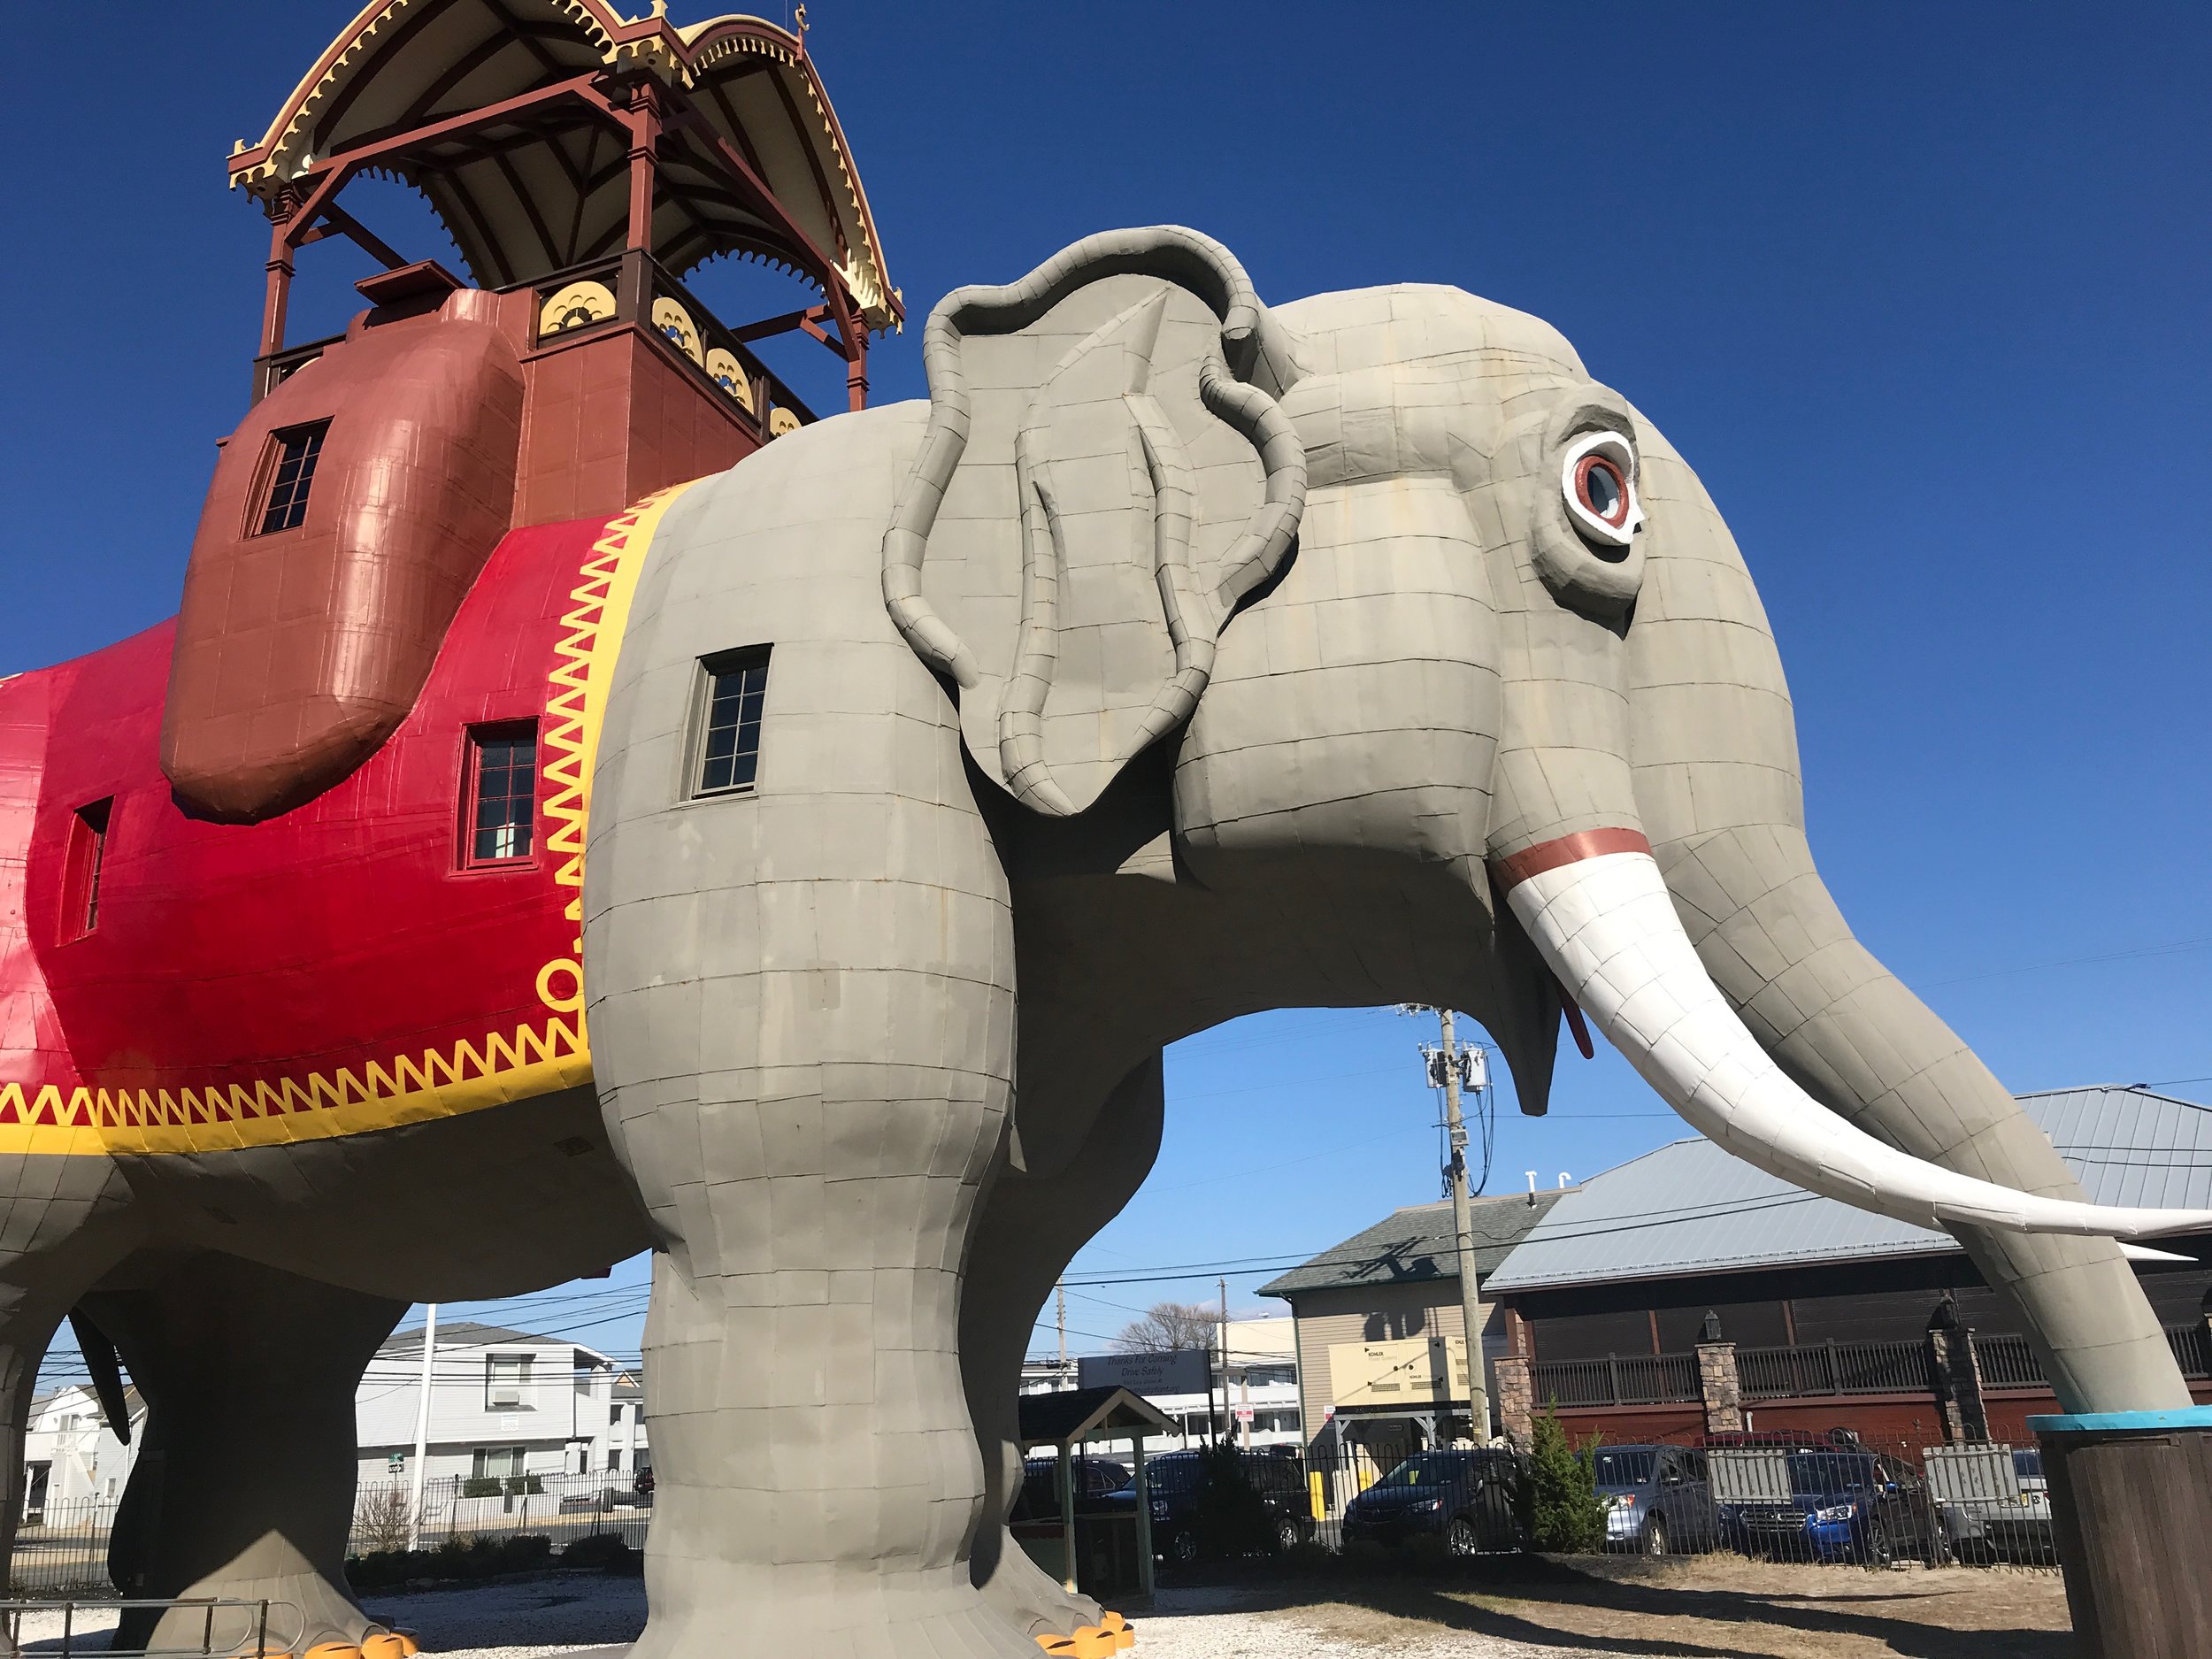  Lucy, the World’s Largest Elephant, was built in 1881 to draw vacationers to the Jersey Shore. Preservationists rescued and restored Lucy in the 1970s.      